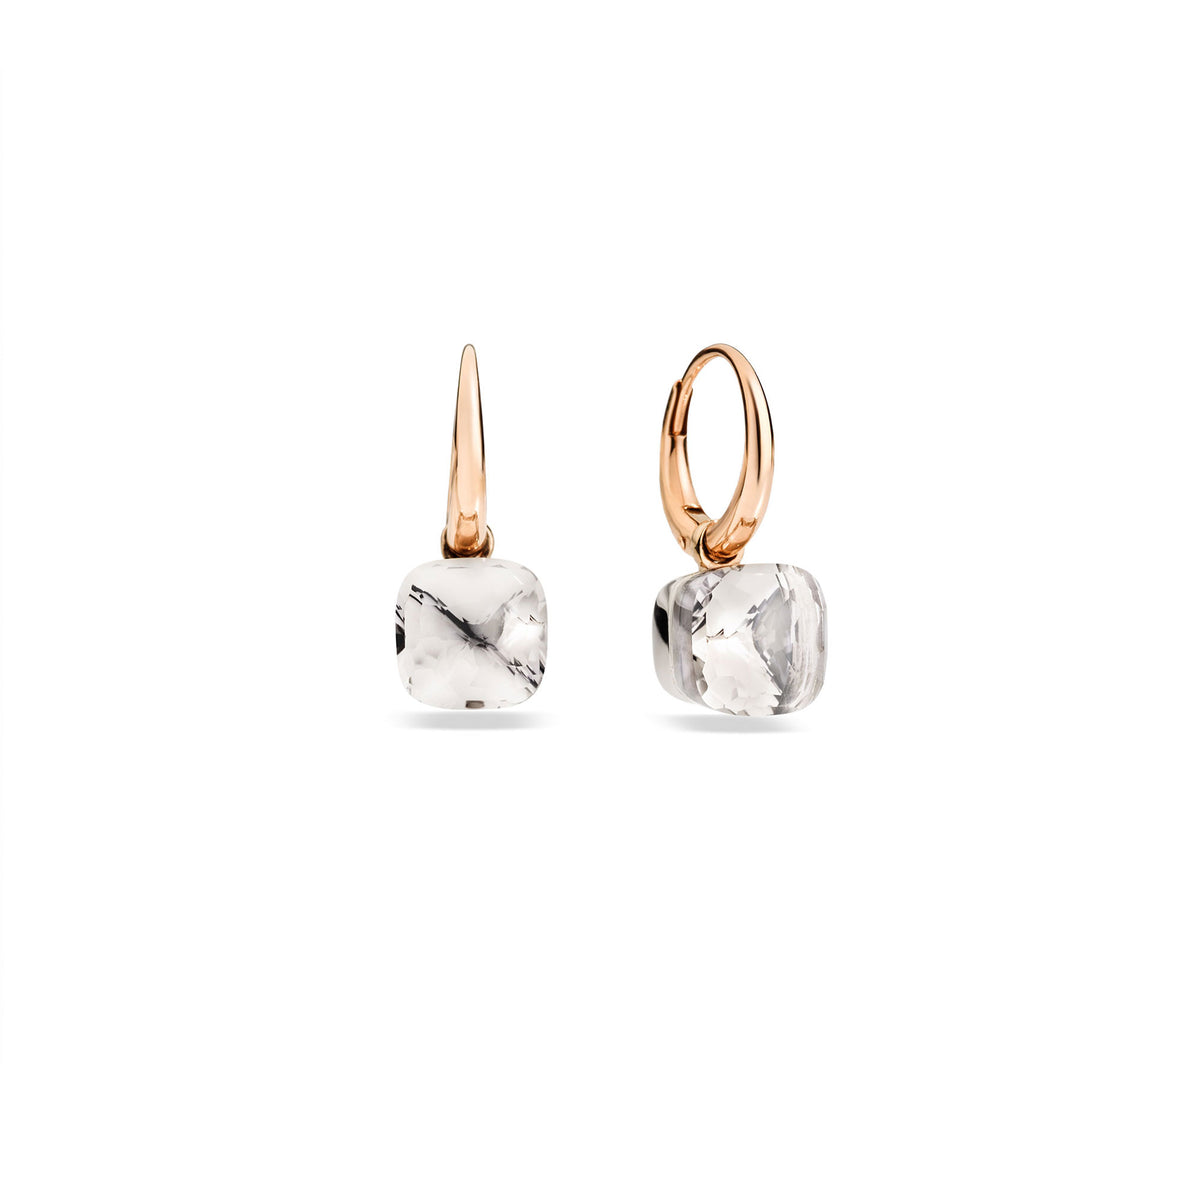 Nudo Petit Earrings in 18k Rose Gold and White Gold with White Topaz - Orsini Jewellers NZ